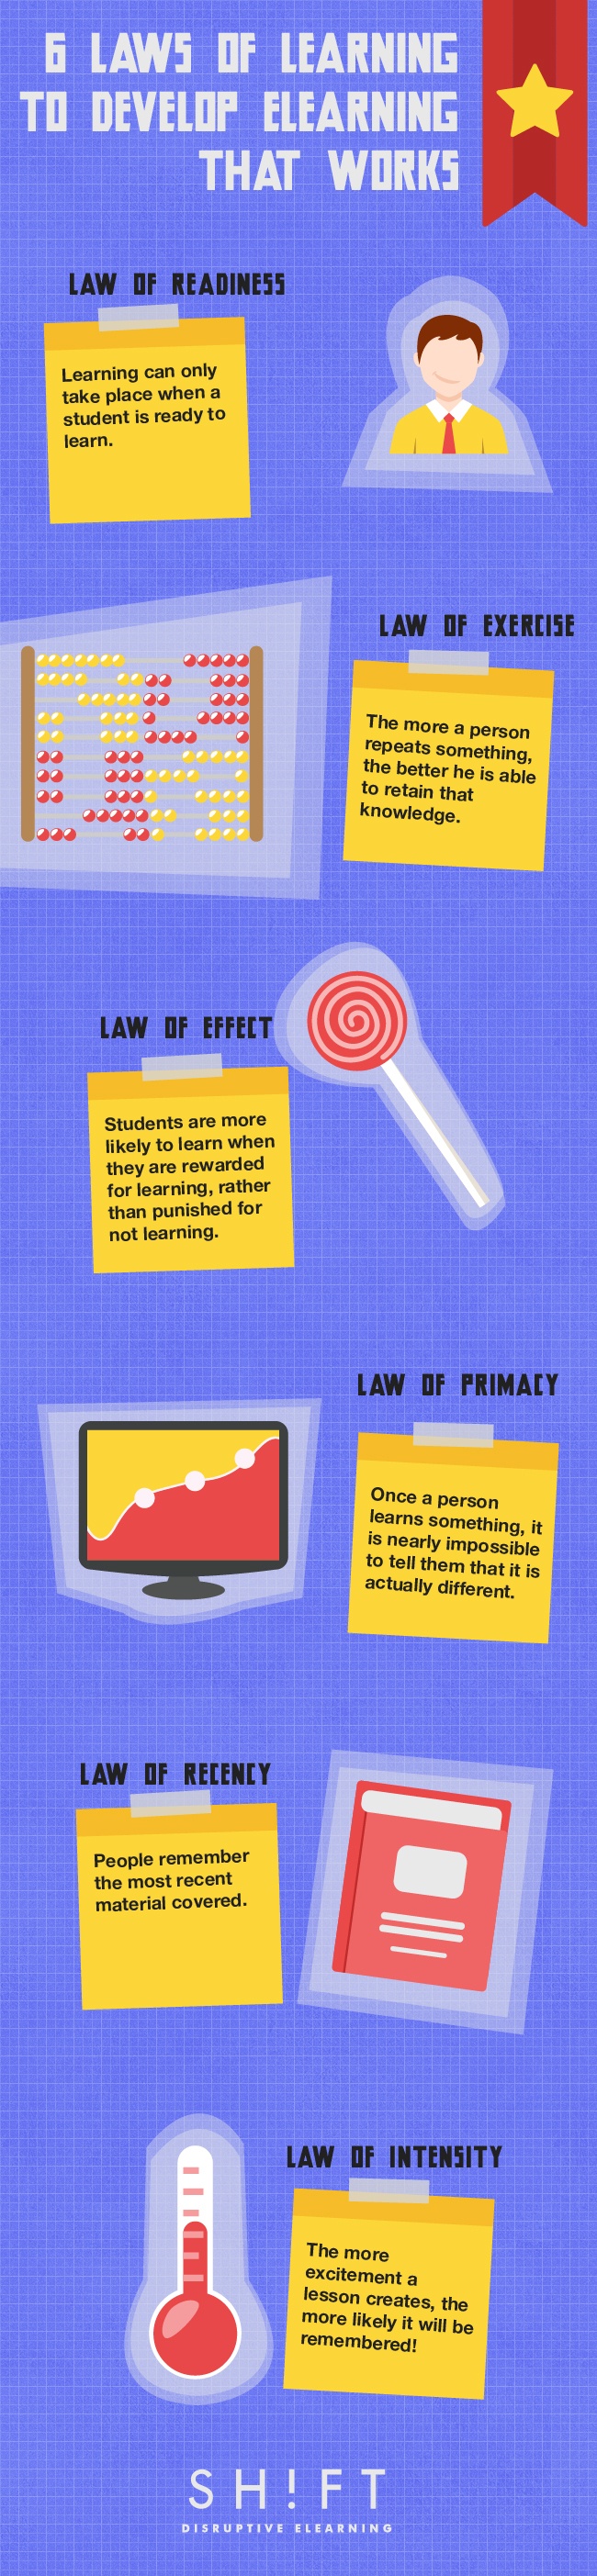 6 Laws of Learning To Develop eLearning Infographic